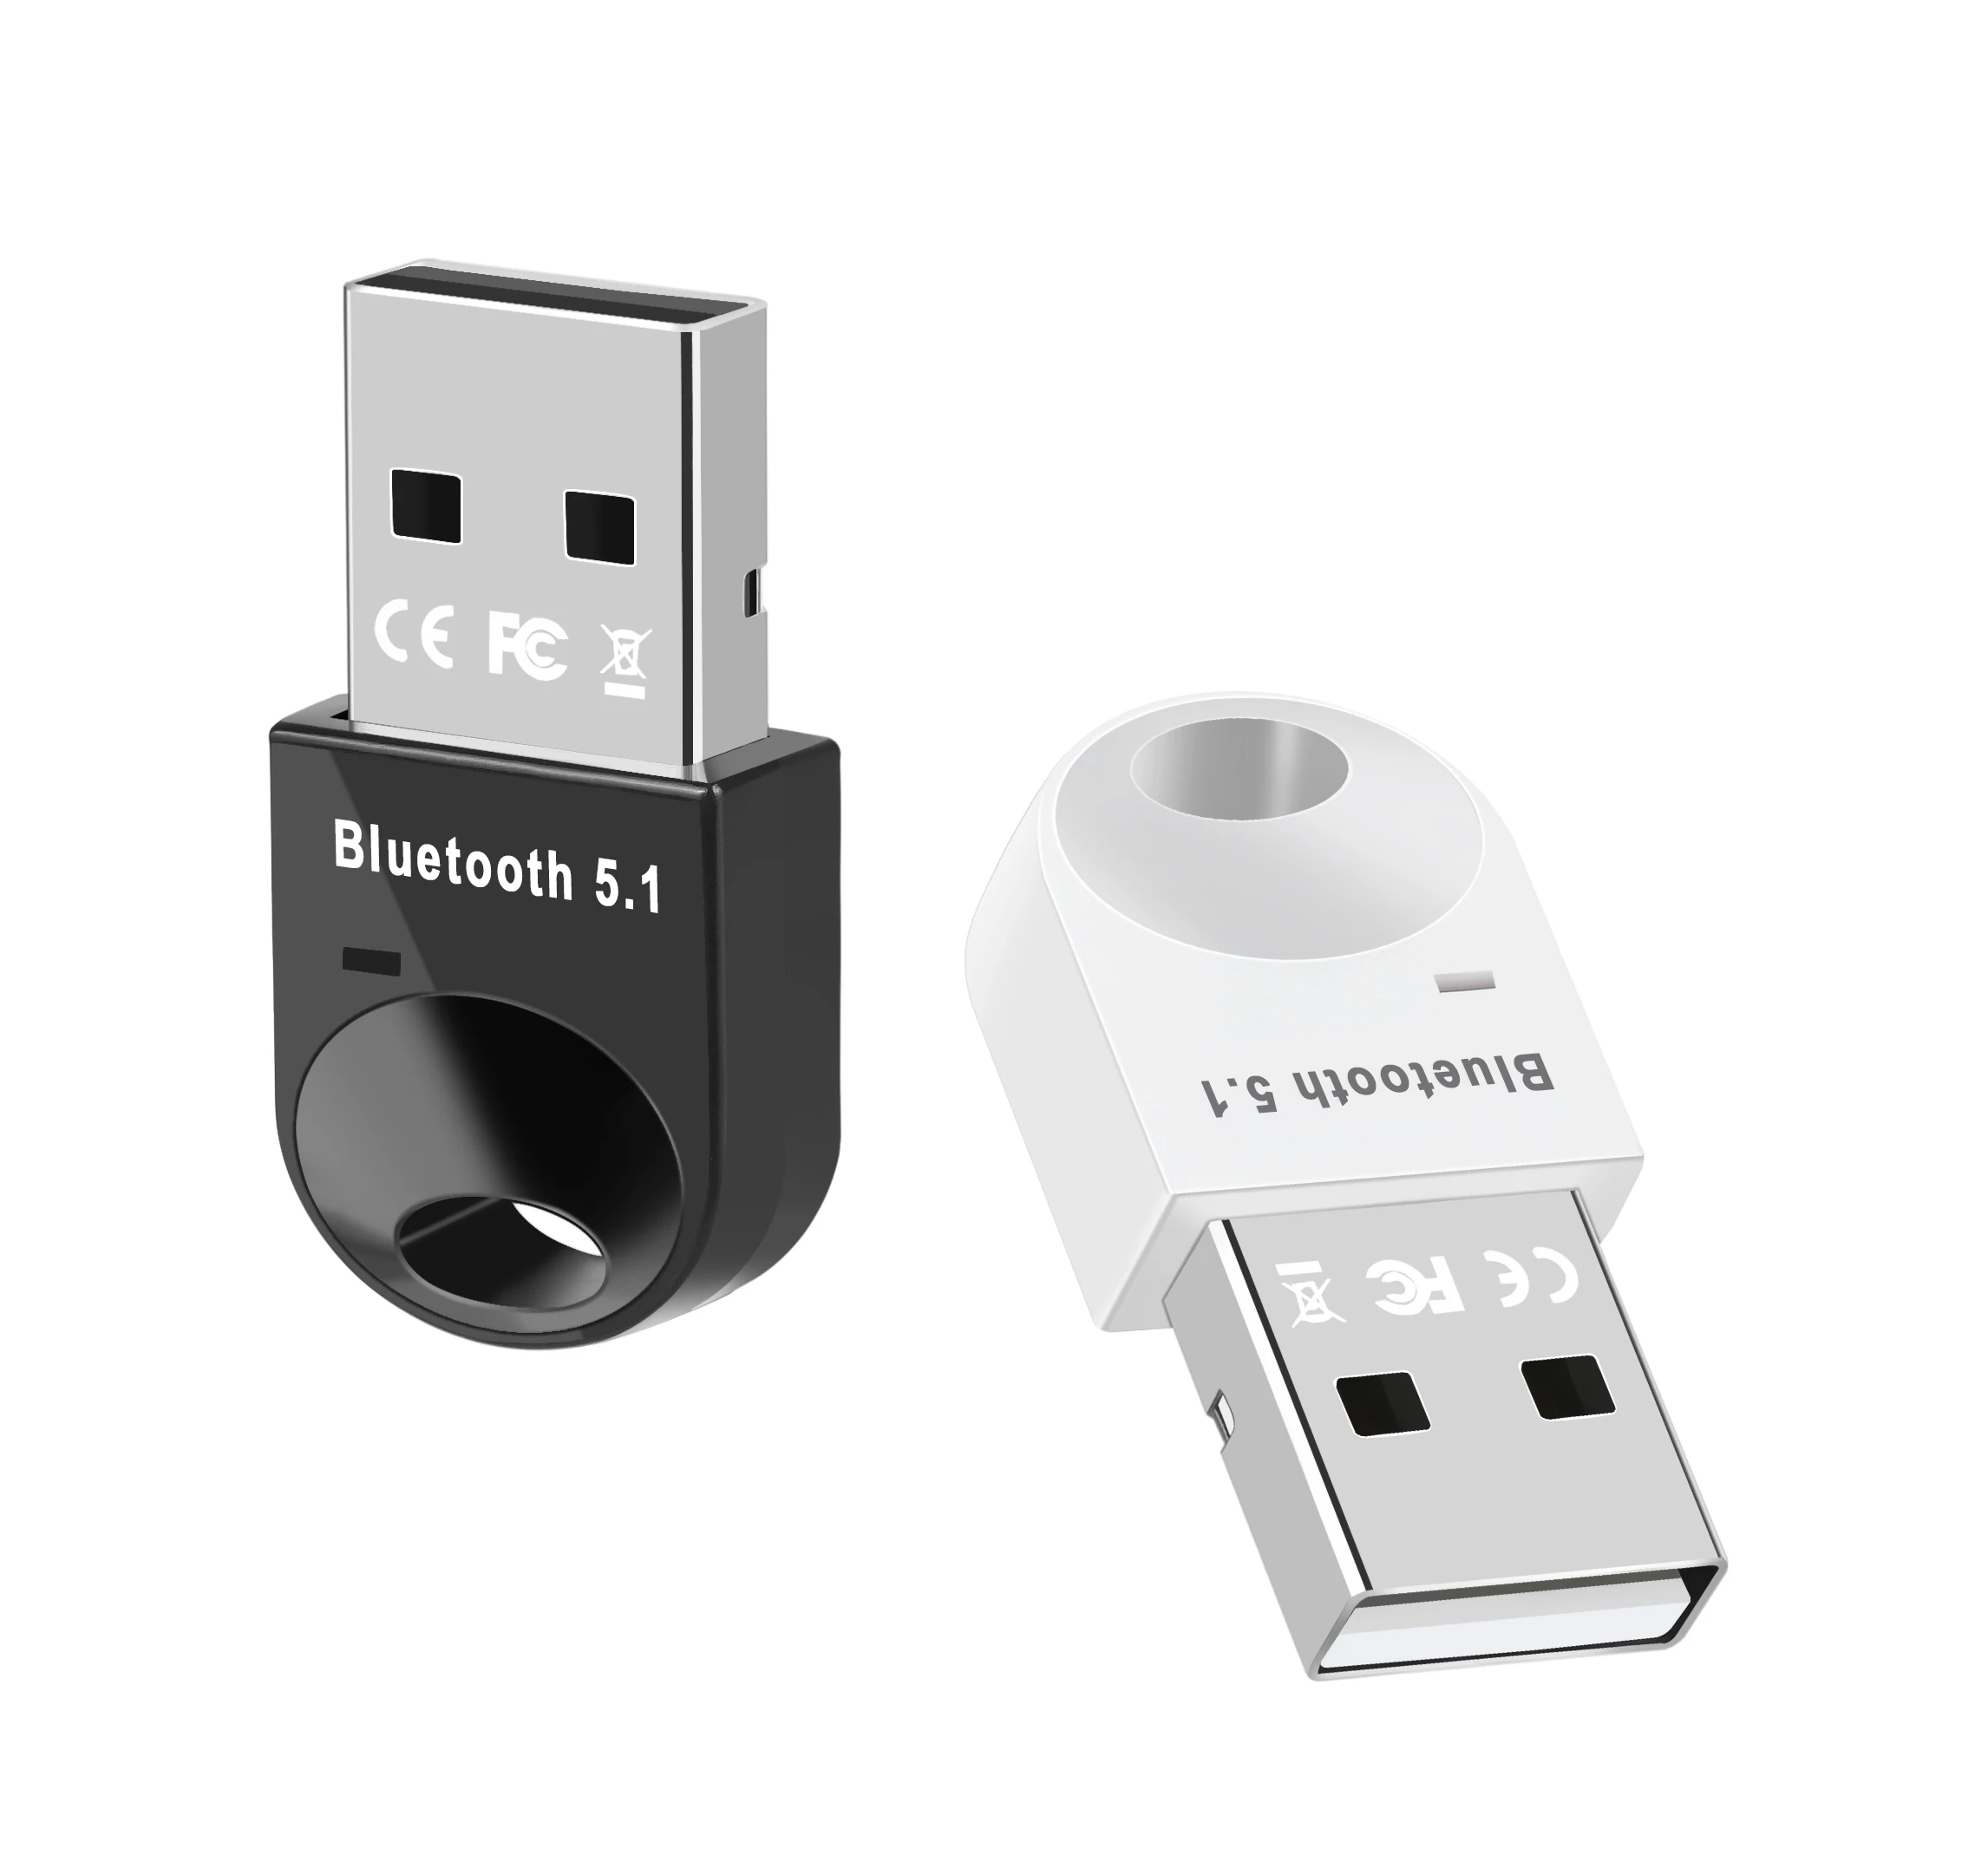 høste announcer Opdagelse Source BT5.1 Mini Dongle Bluetooth Adapter for PC Bluetooth Headphones  Speakers Keyboard Mouse Printer Window 11/10/8/7 Adapters on m.alibaba.com